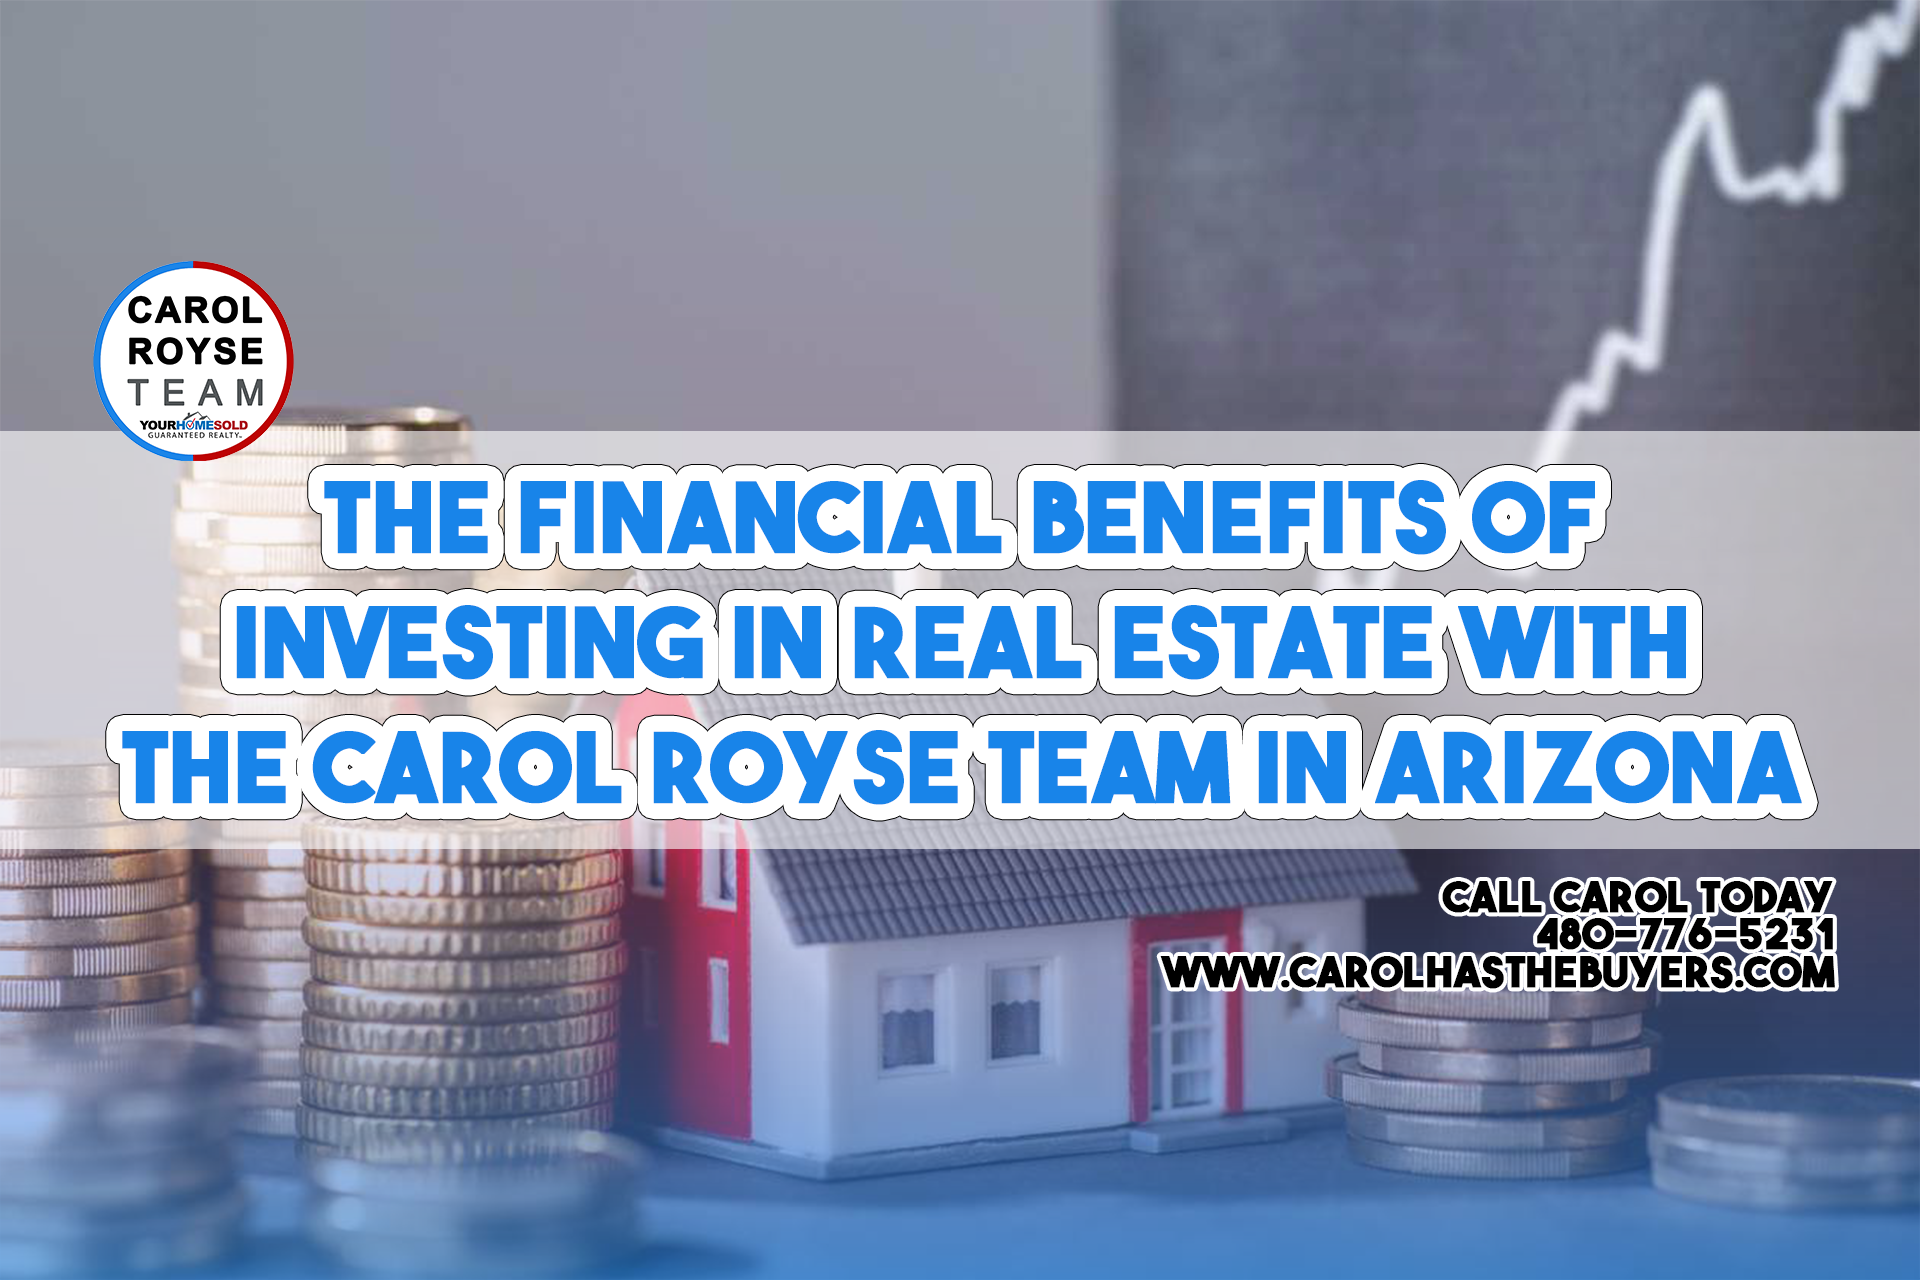 The Financial Benefits of Investing in Real Estate with The Carol Royse Team in Arizona